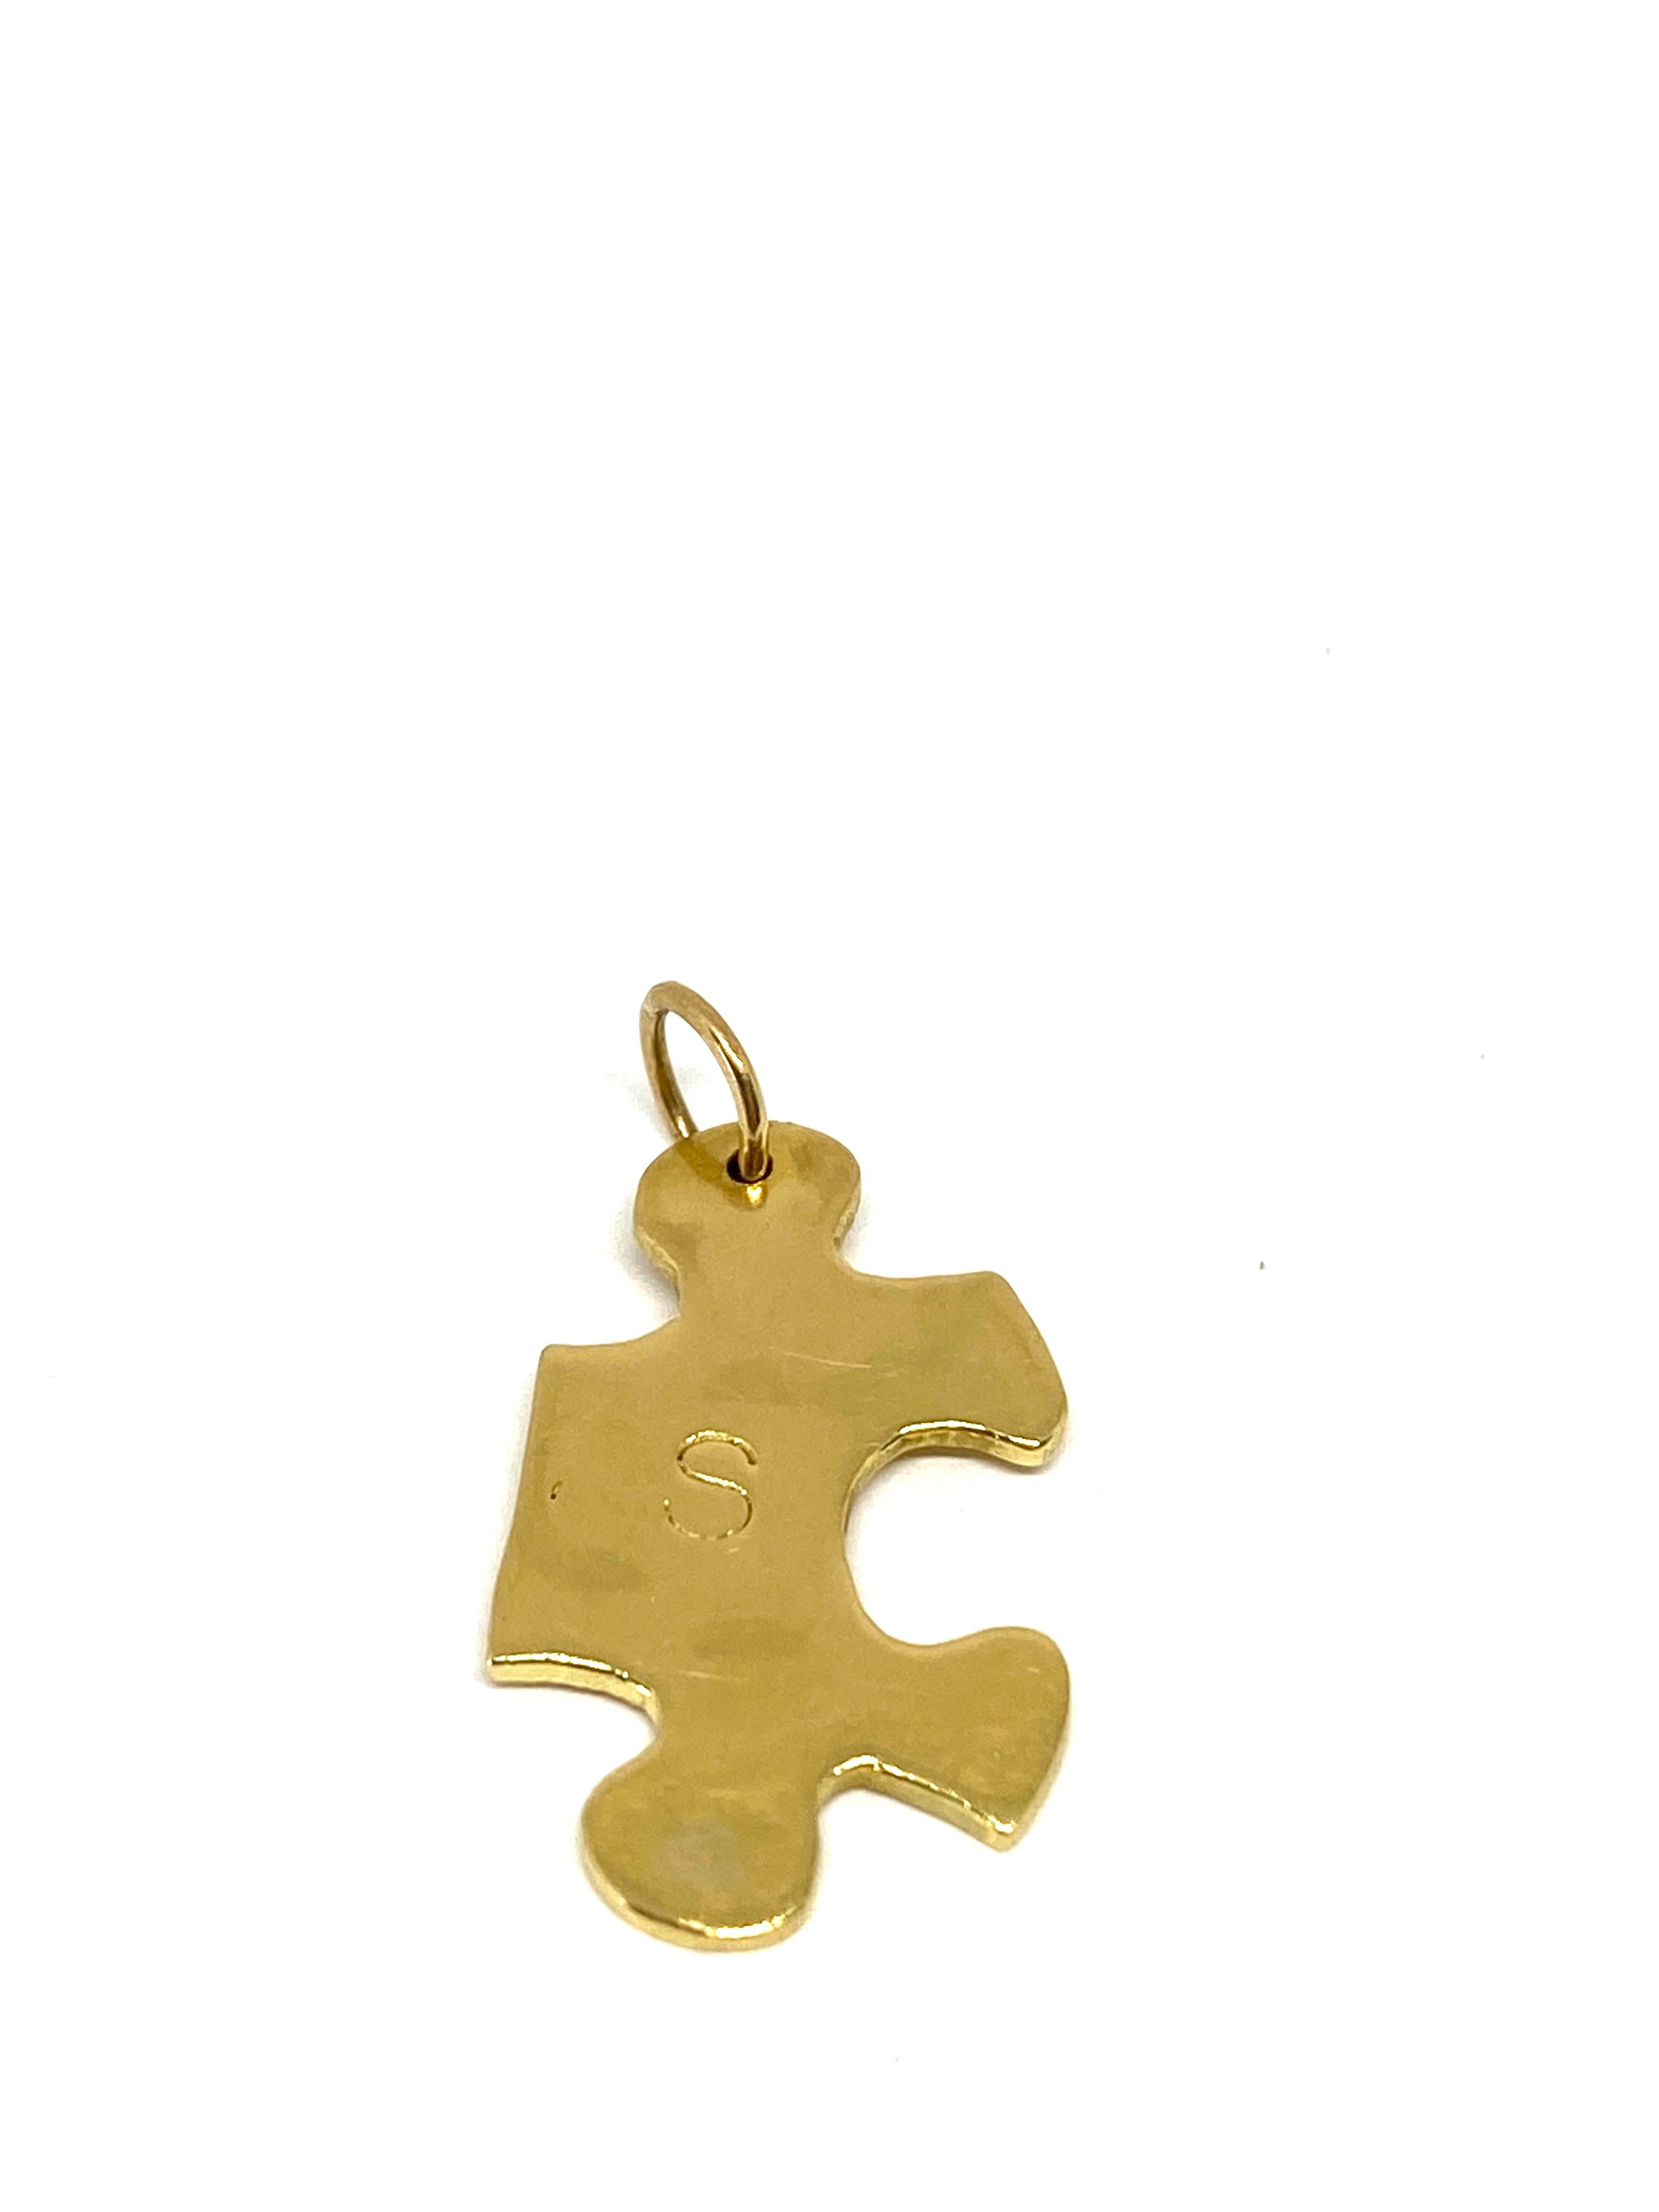 Jennifer Fisher 18k Yellow Gold S Initial Puzzle Piece Charm Pendant

Product details:
750 18K yellow gold
The charm/ pendant shaped in a puzzle piece
Featuring engraved S initial letter on the front
Designer signed on the back JF
Total weight is